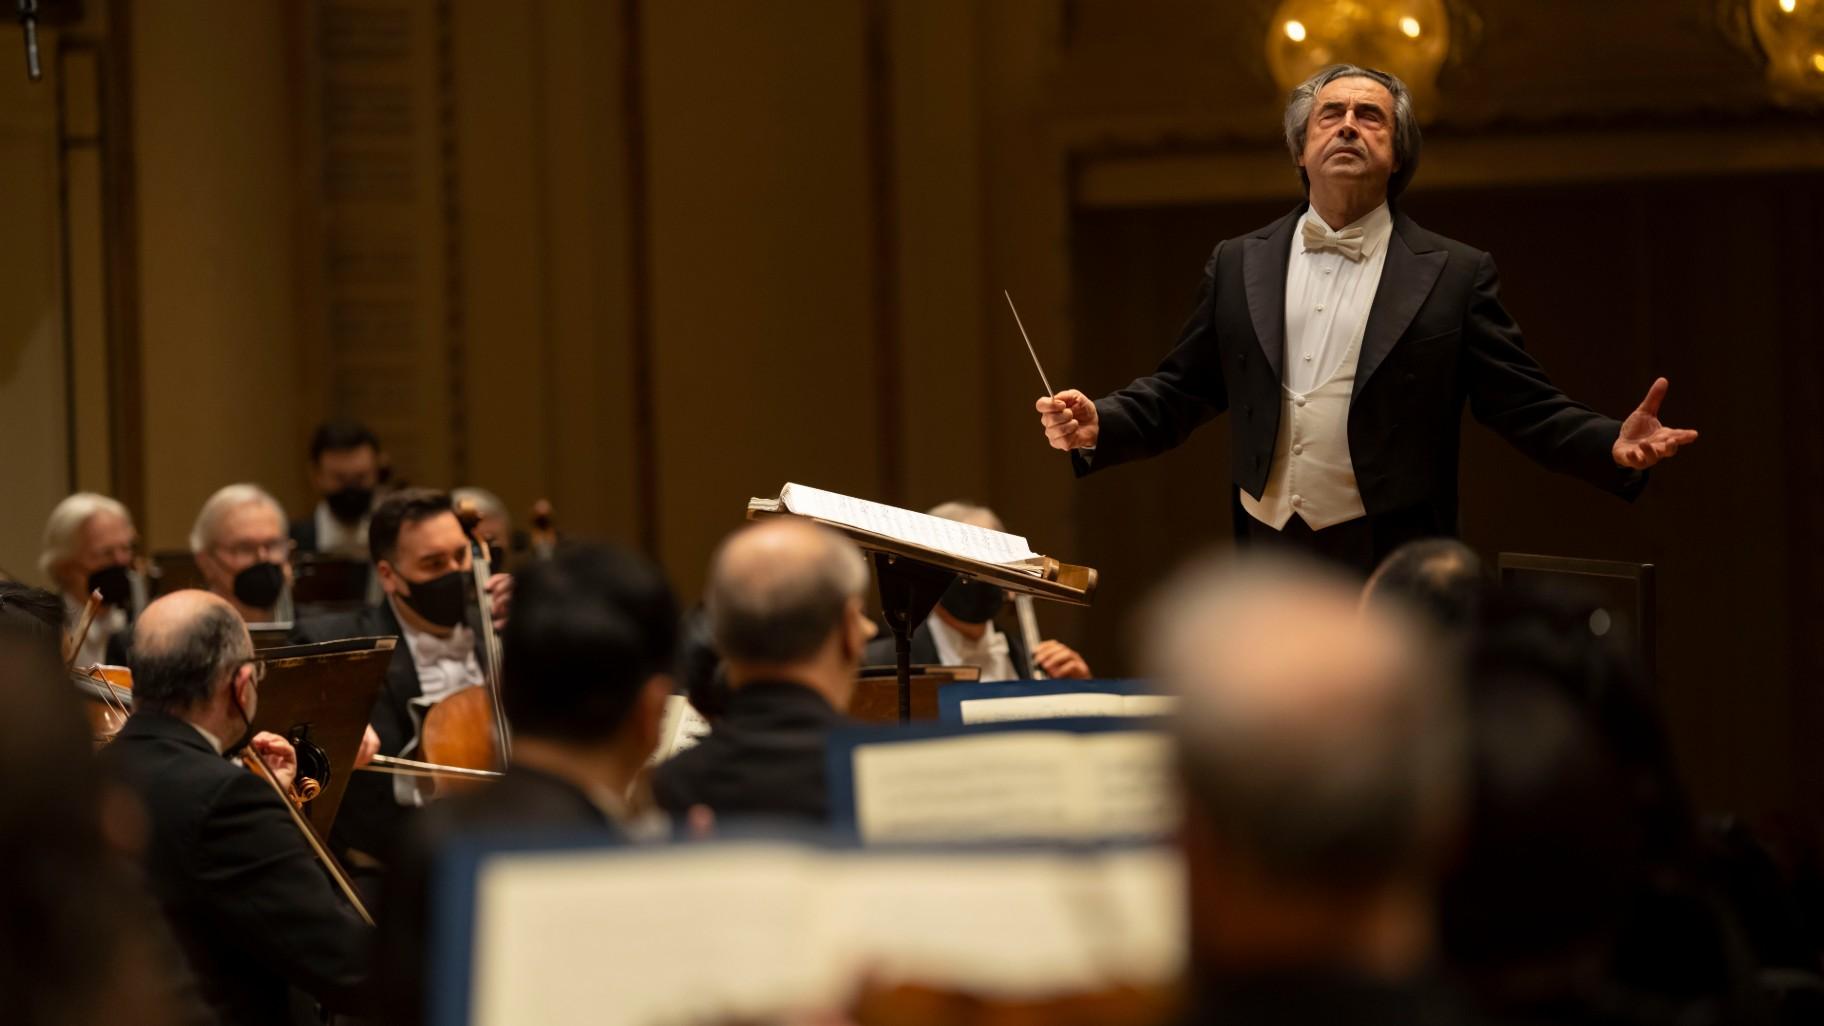 Music Director Riccardo Muti leads the Chicago Symphony Orchestra in Beethoven’s “Symphony No.9” on Feb. 24, 2022. (Credit: Todd Rosenberg)